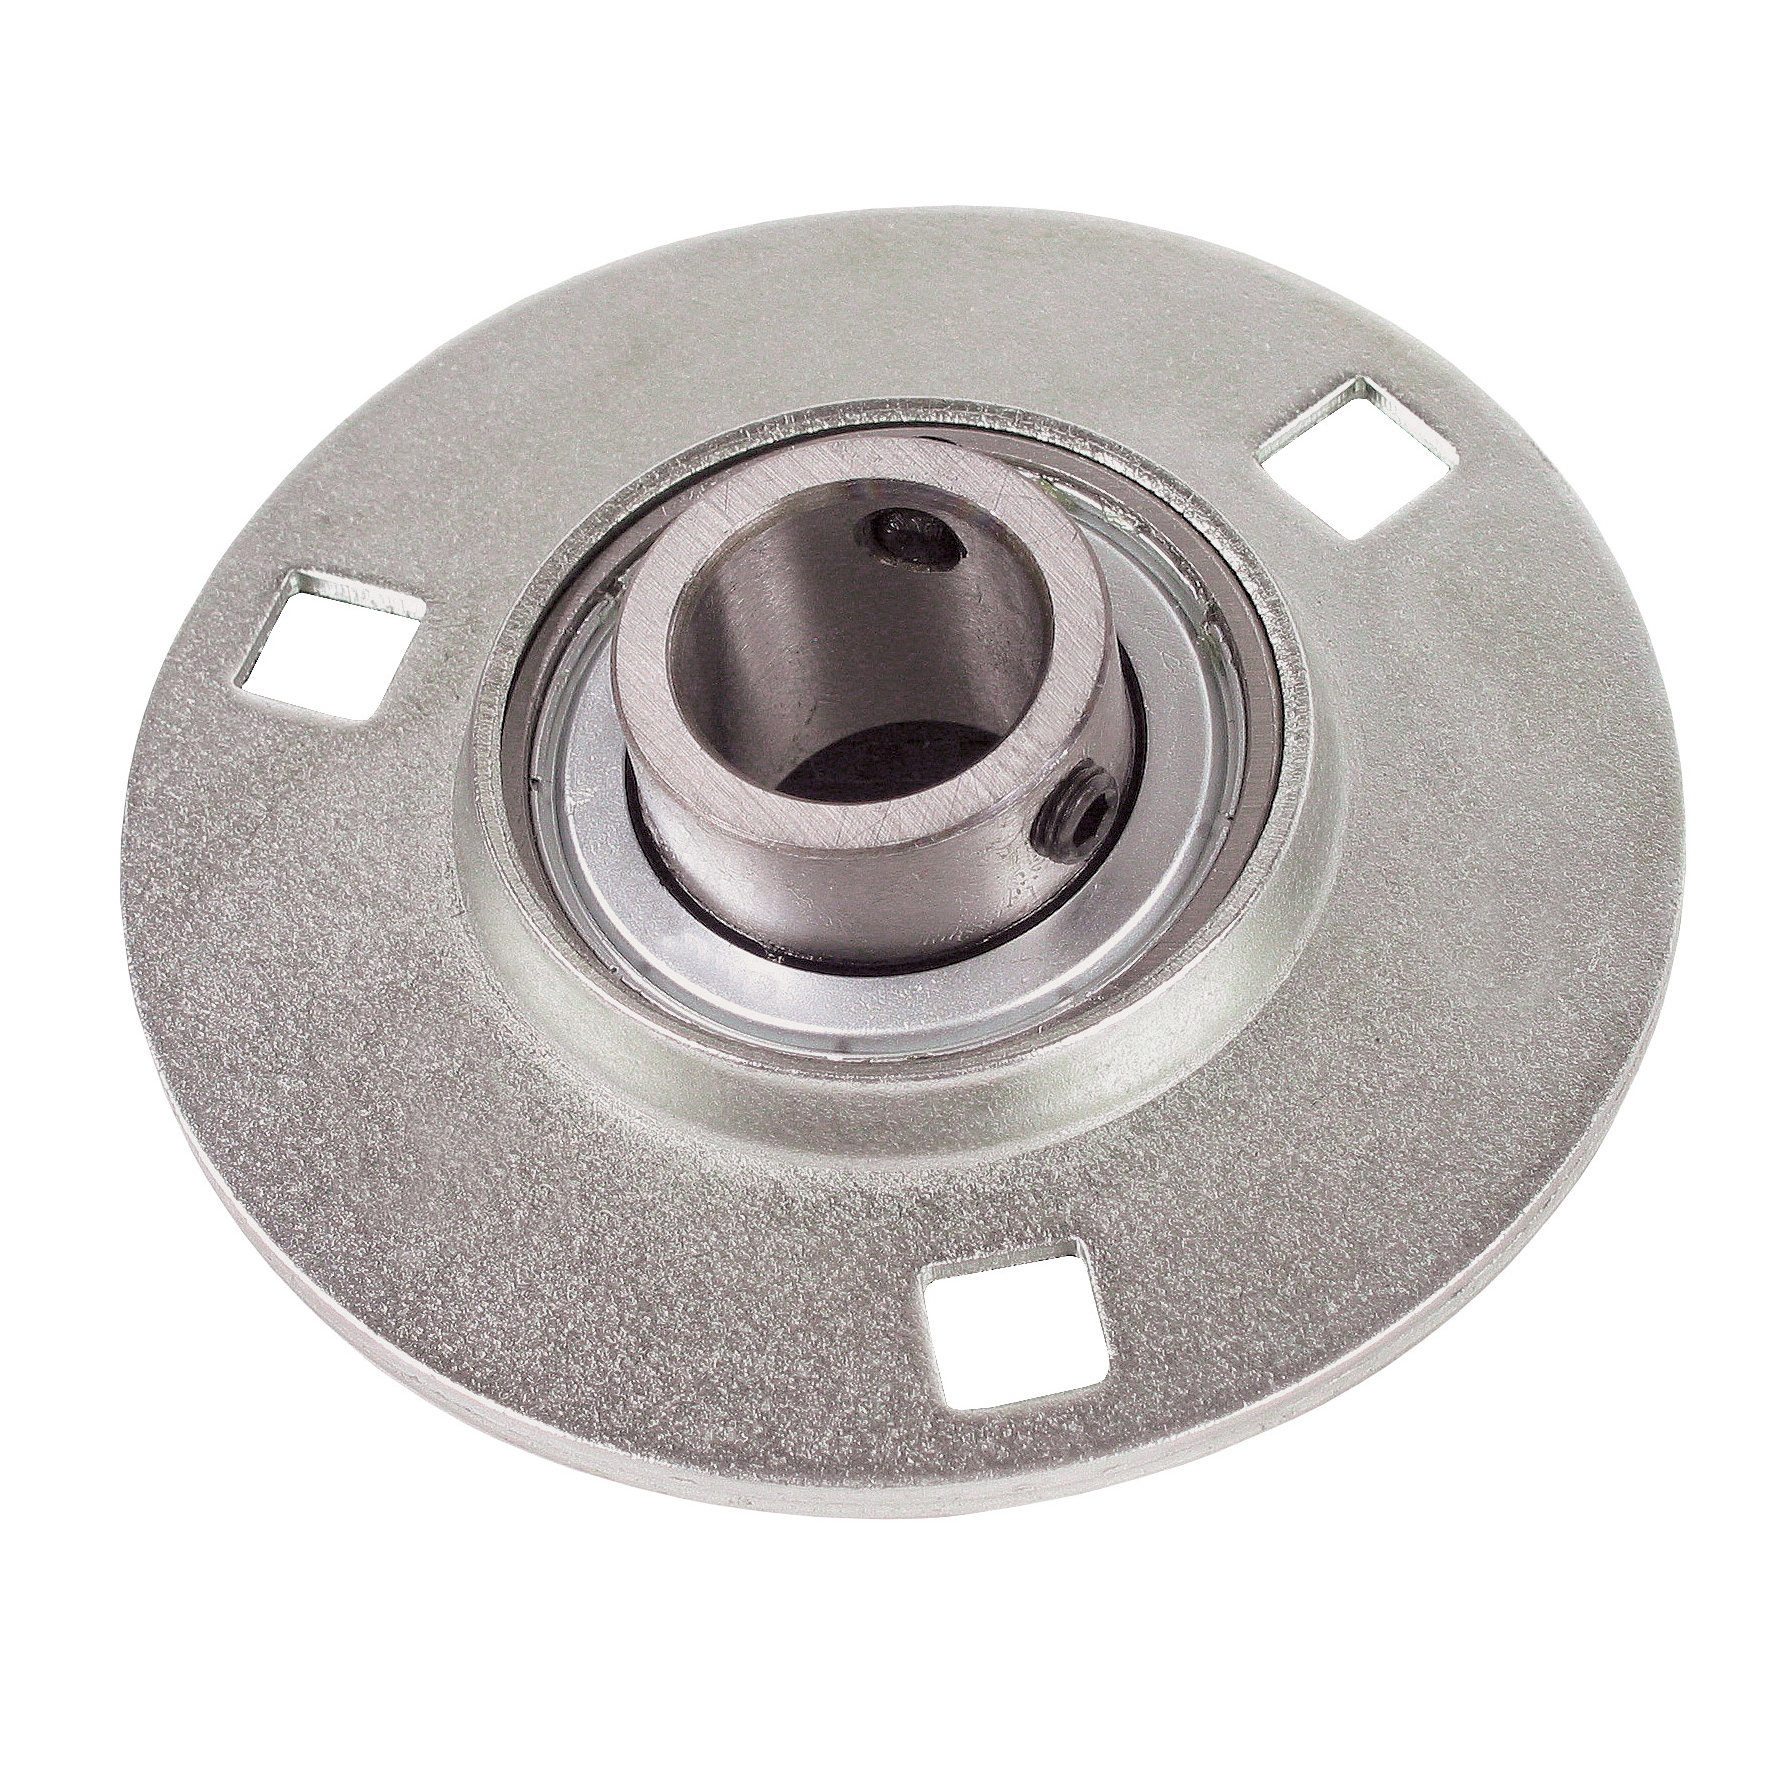 Pressed stainless steel flange bearing - Stainless steel - 3 fixing holes - Light